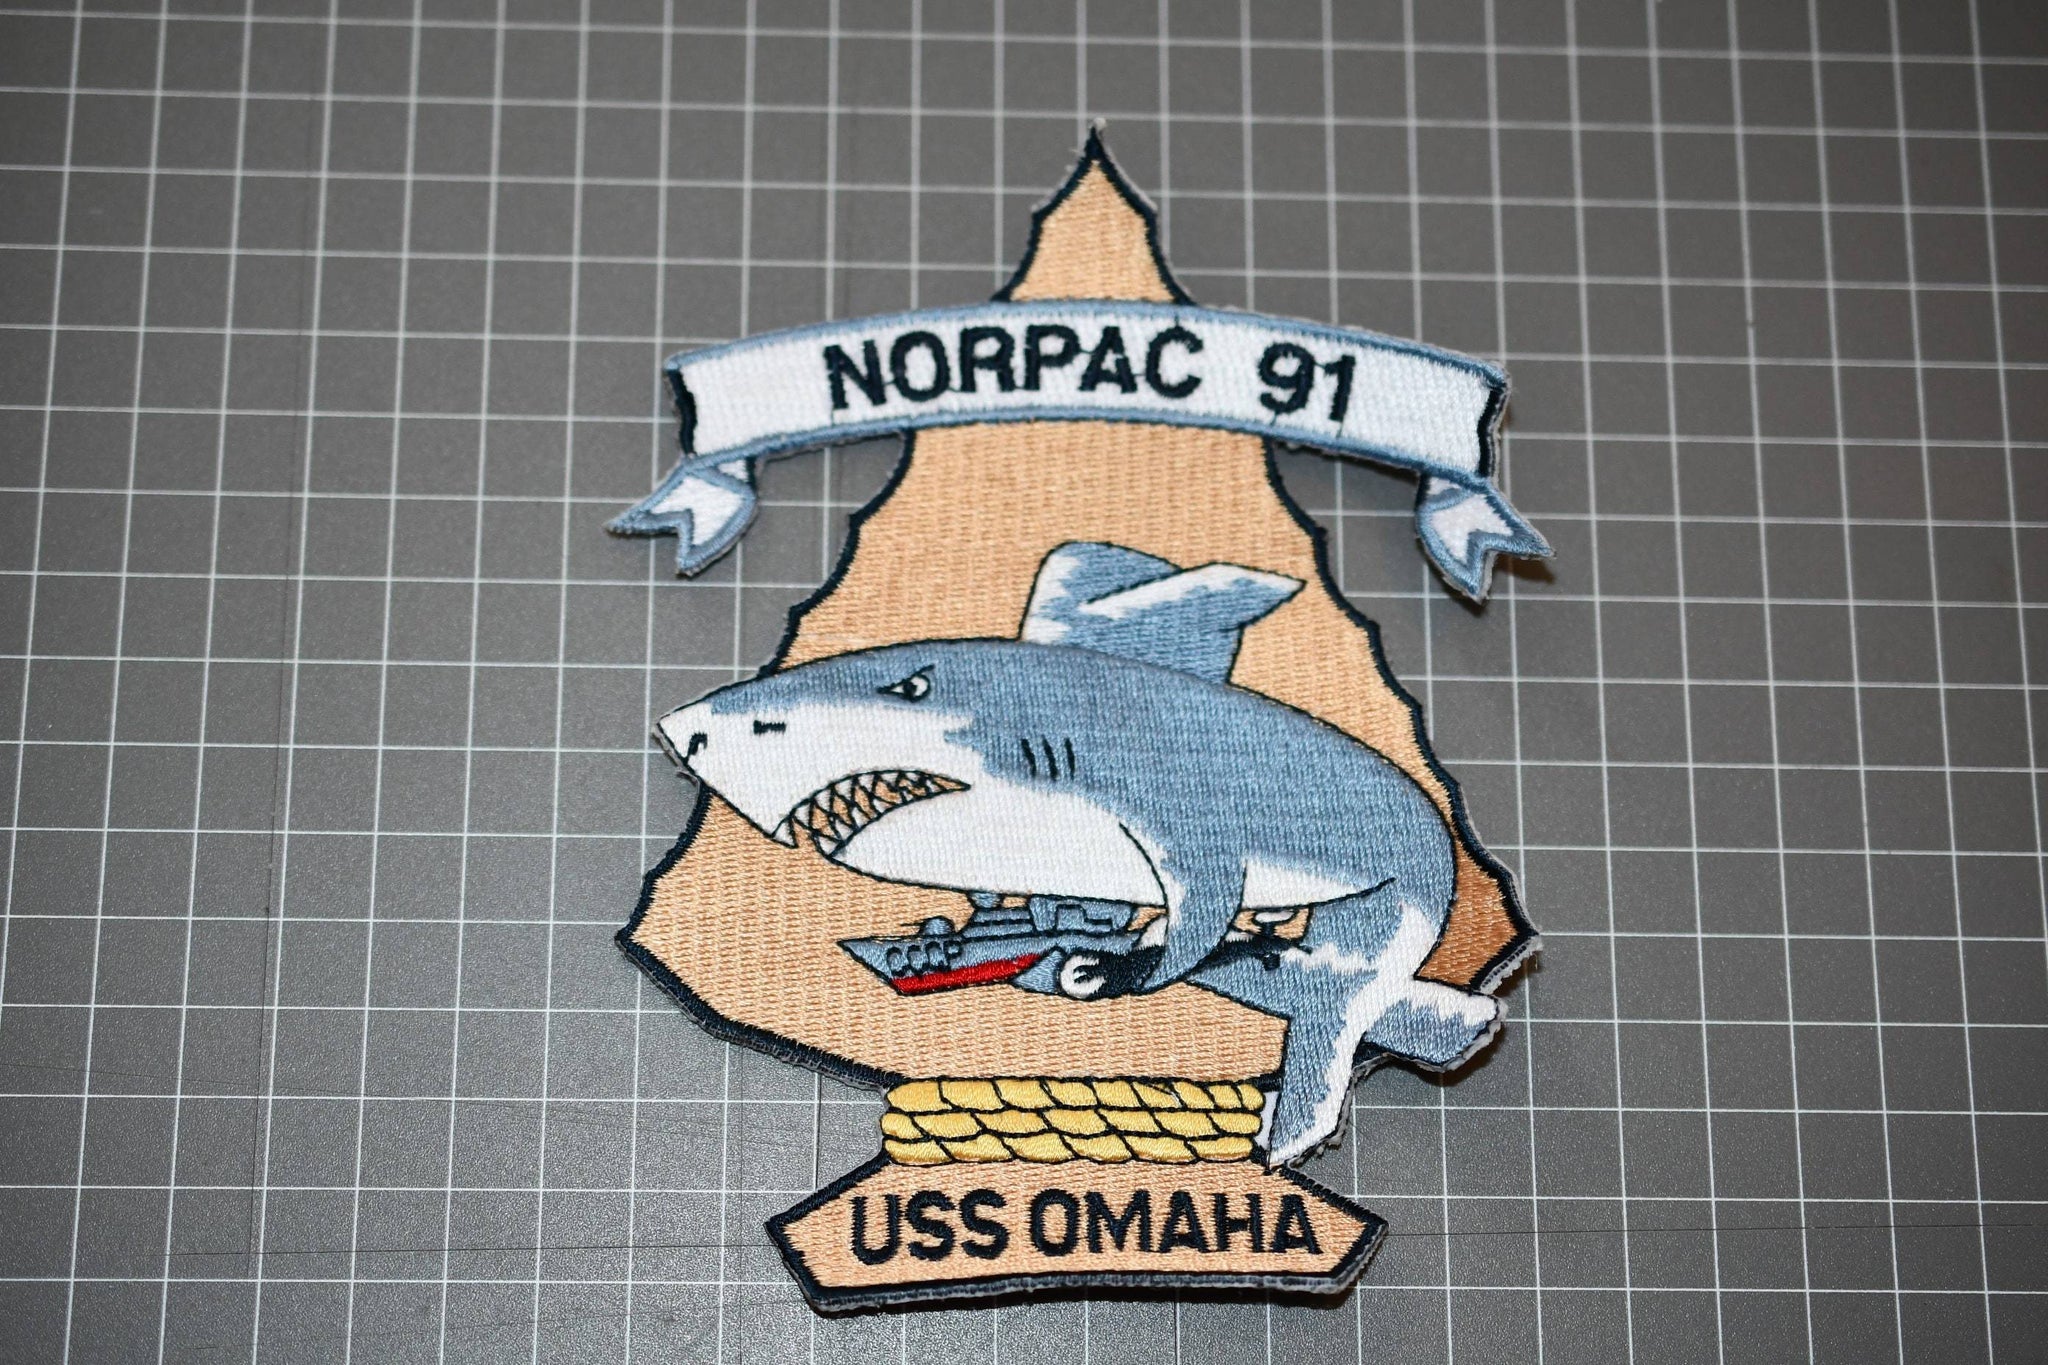 USN USS Omaha NORPAC 91 Patch (B10-139)